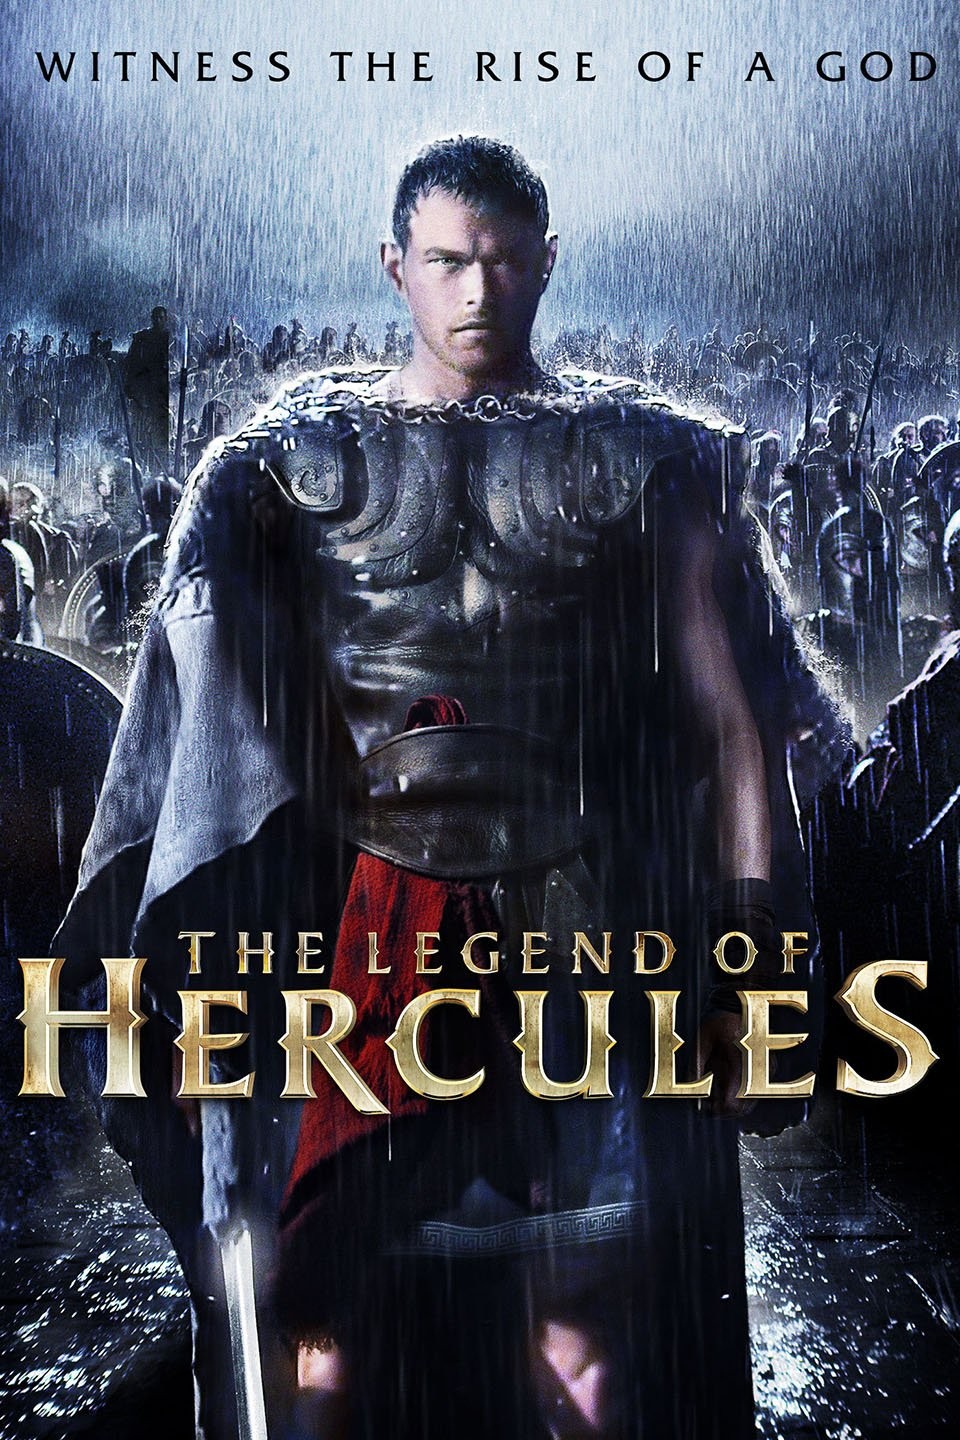 The Legend of Legendary Heroes: Part 1 (Blu-ray/DVD, 2012, 4-Disc Set,  Limited Edition) for sale online